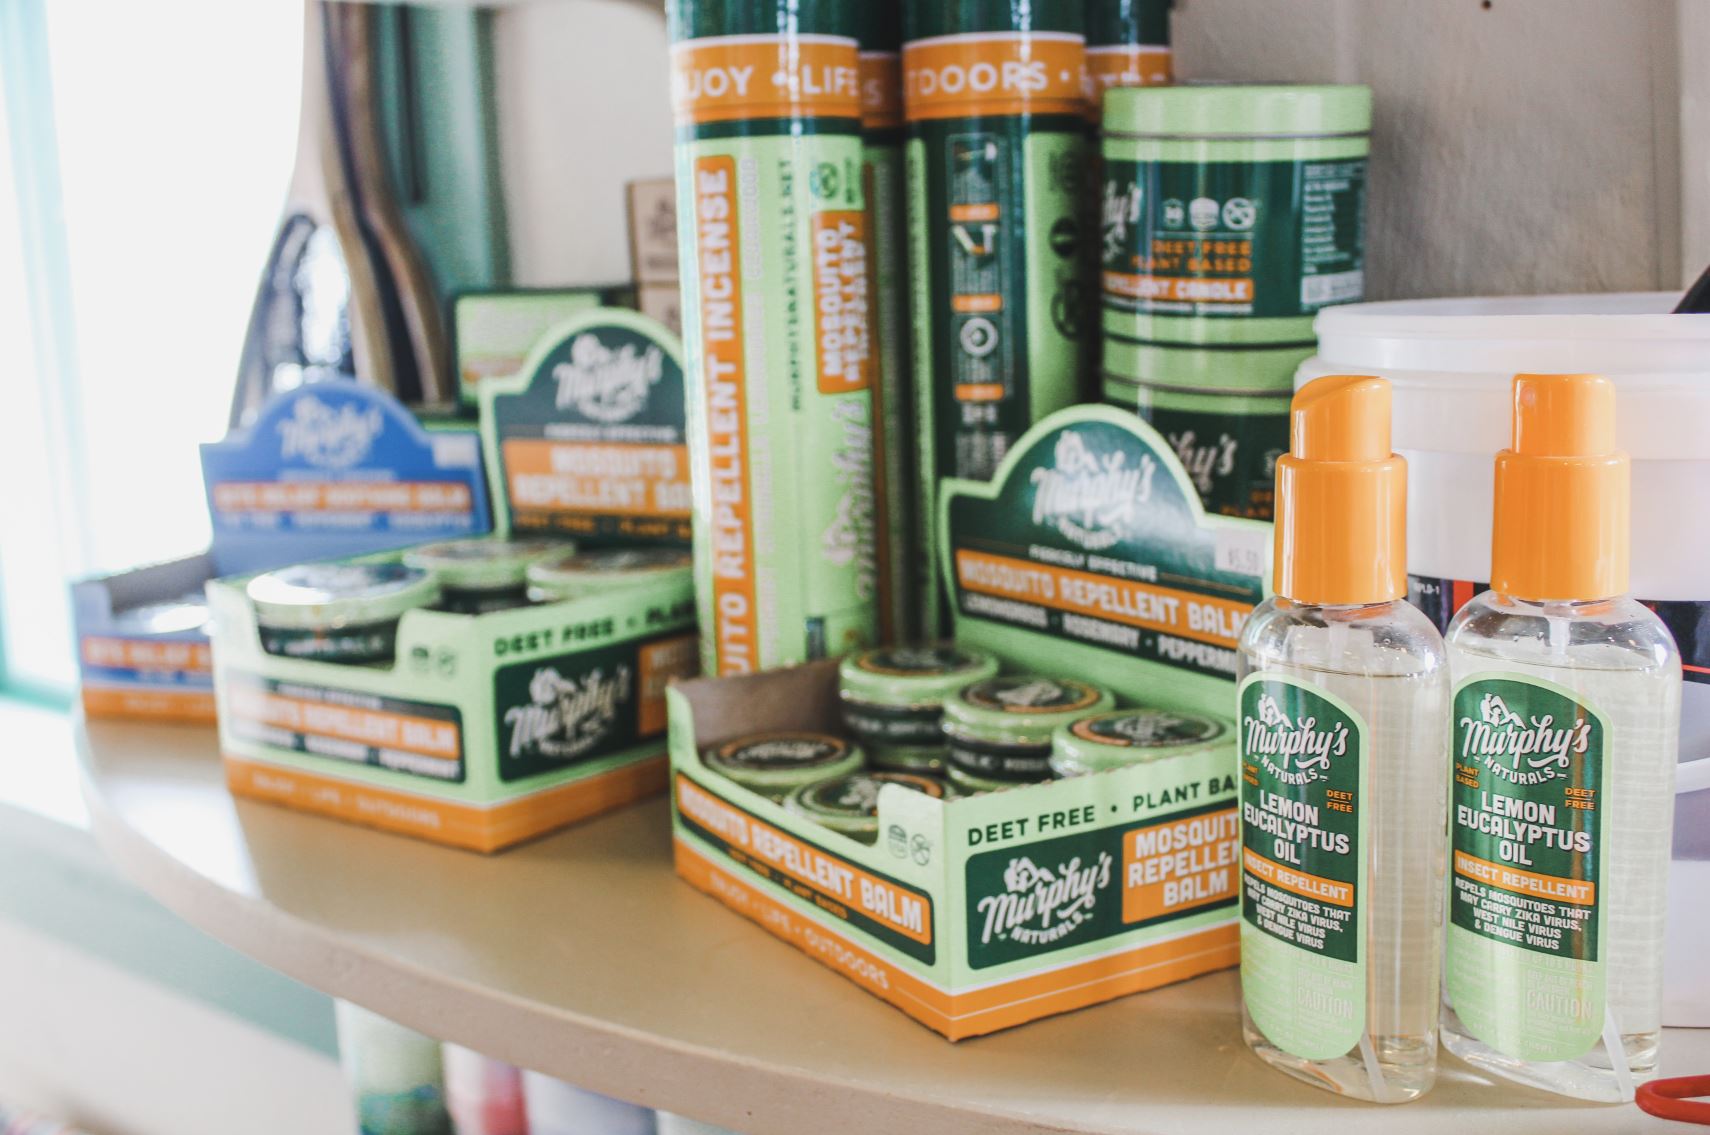 A shelf displaying a variety of bug repellents by Murphy's.